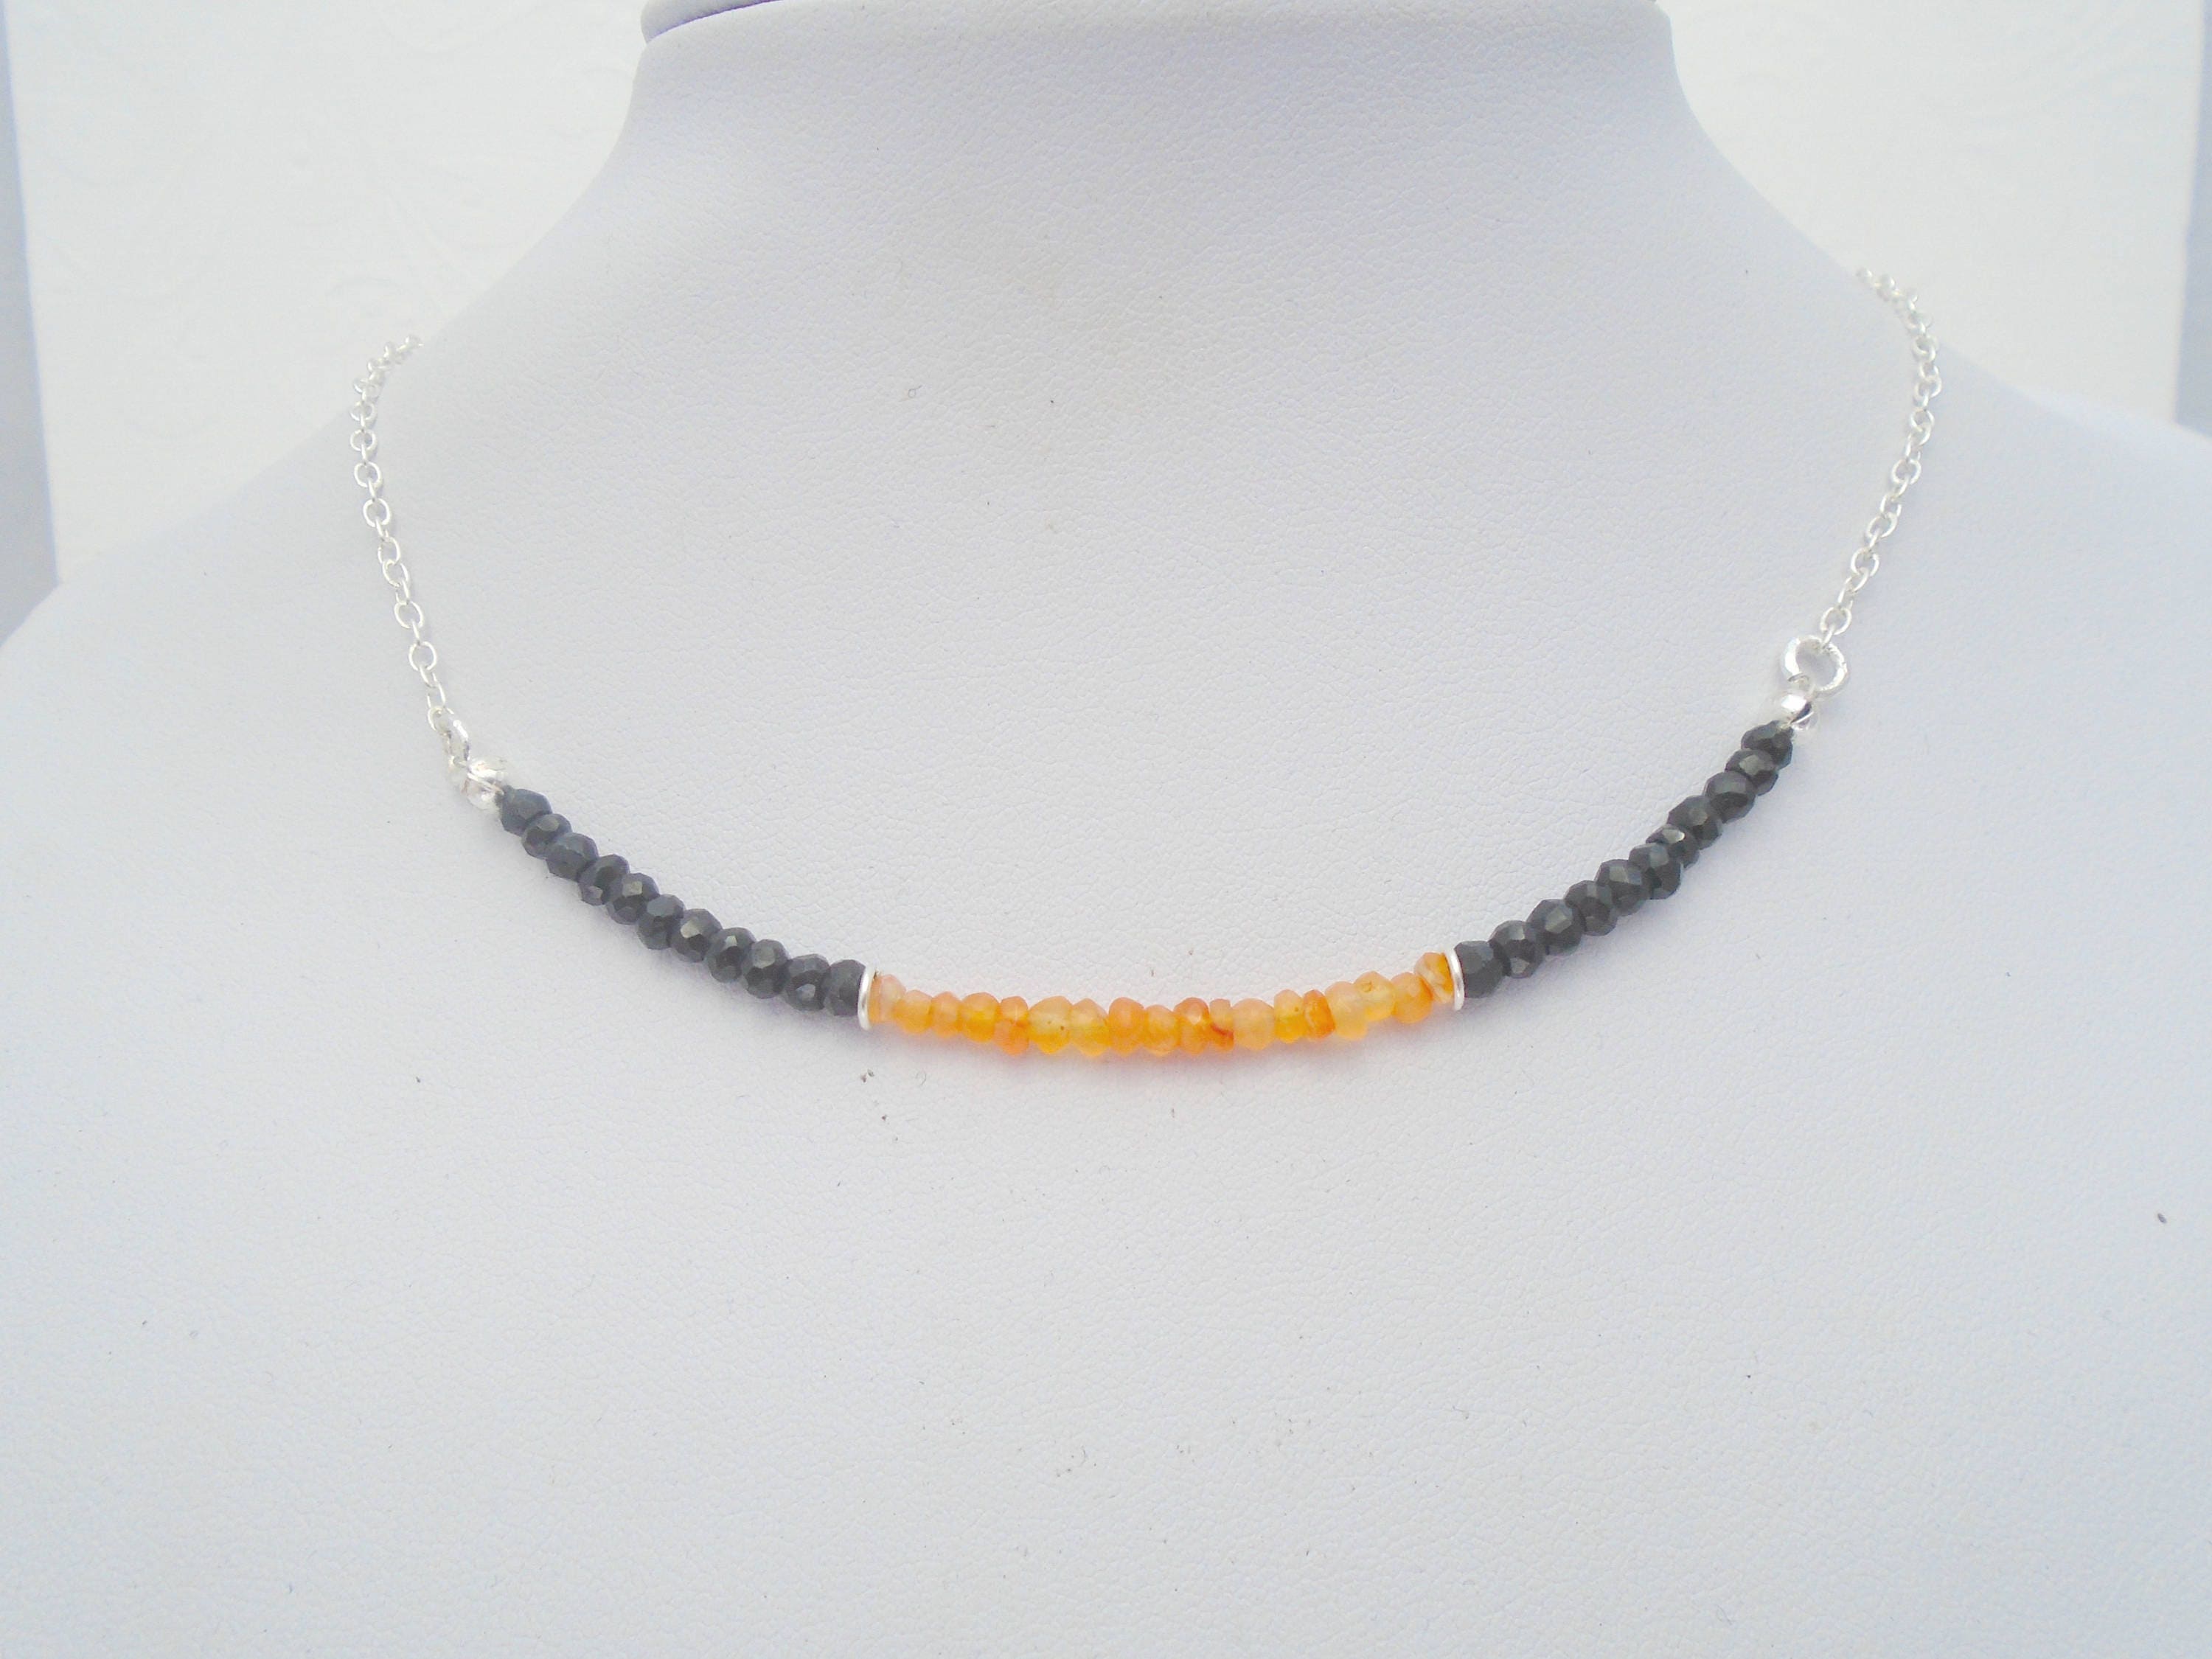 Carnelian and Black Spinel Necklace Black Spinal jewelry